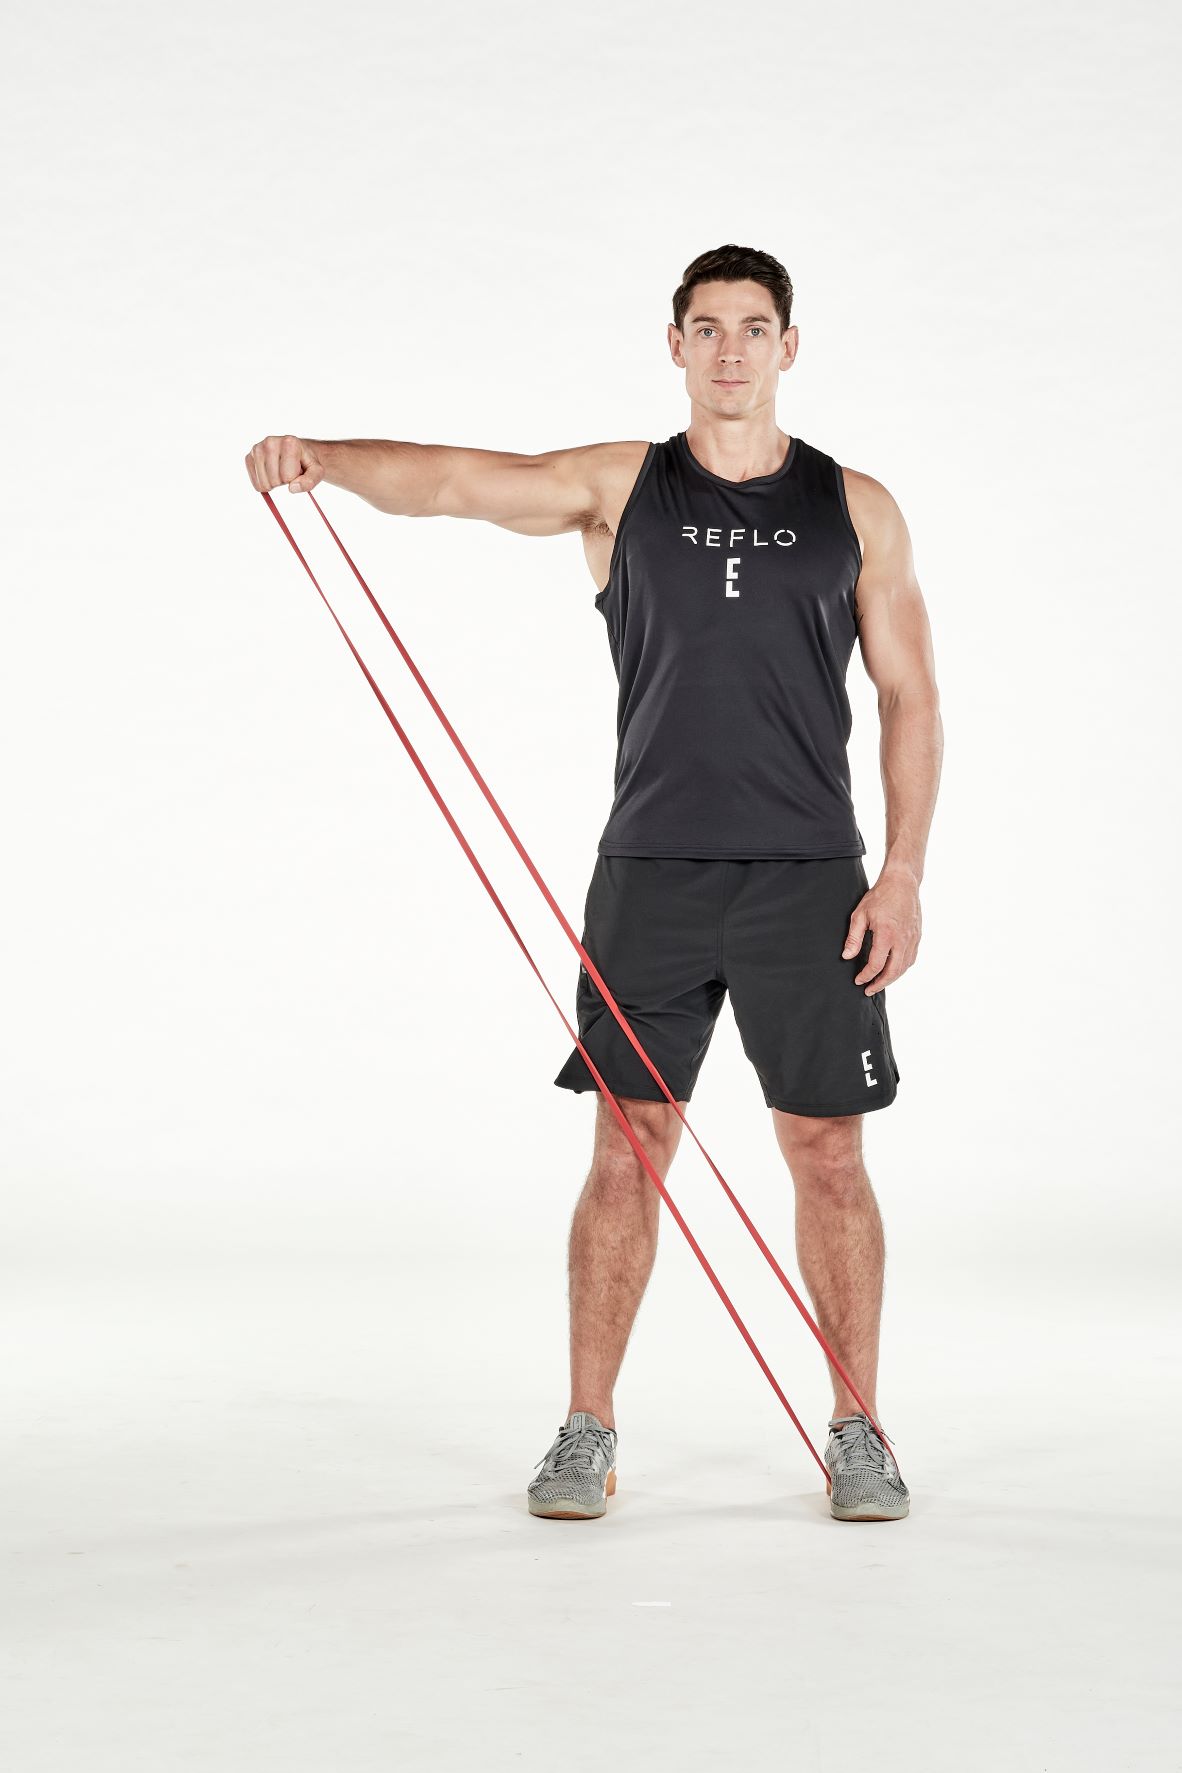 man demonstrating step two of resistance band lateral raise; standing up straight, a resistance band is held under one foot; holding the resistance band with the opposite hand, he extends his arm straight out to the side until it reaches shoulder height; he wears a black fitness vest, black shorts and trainers